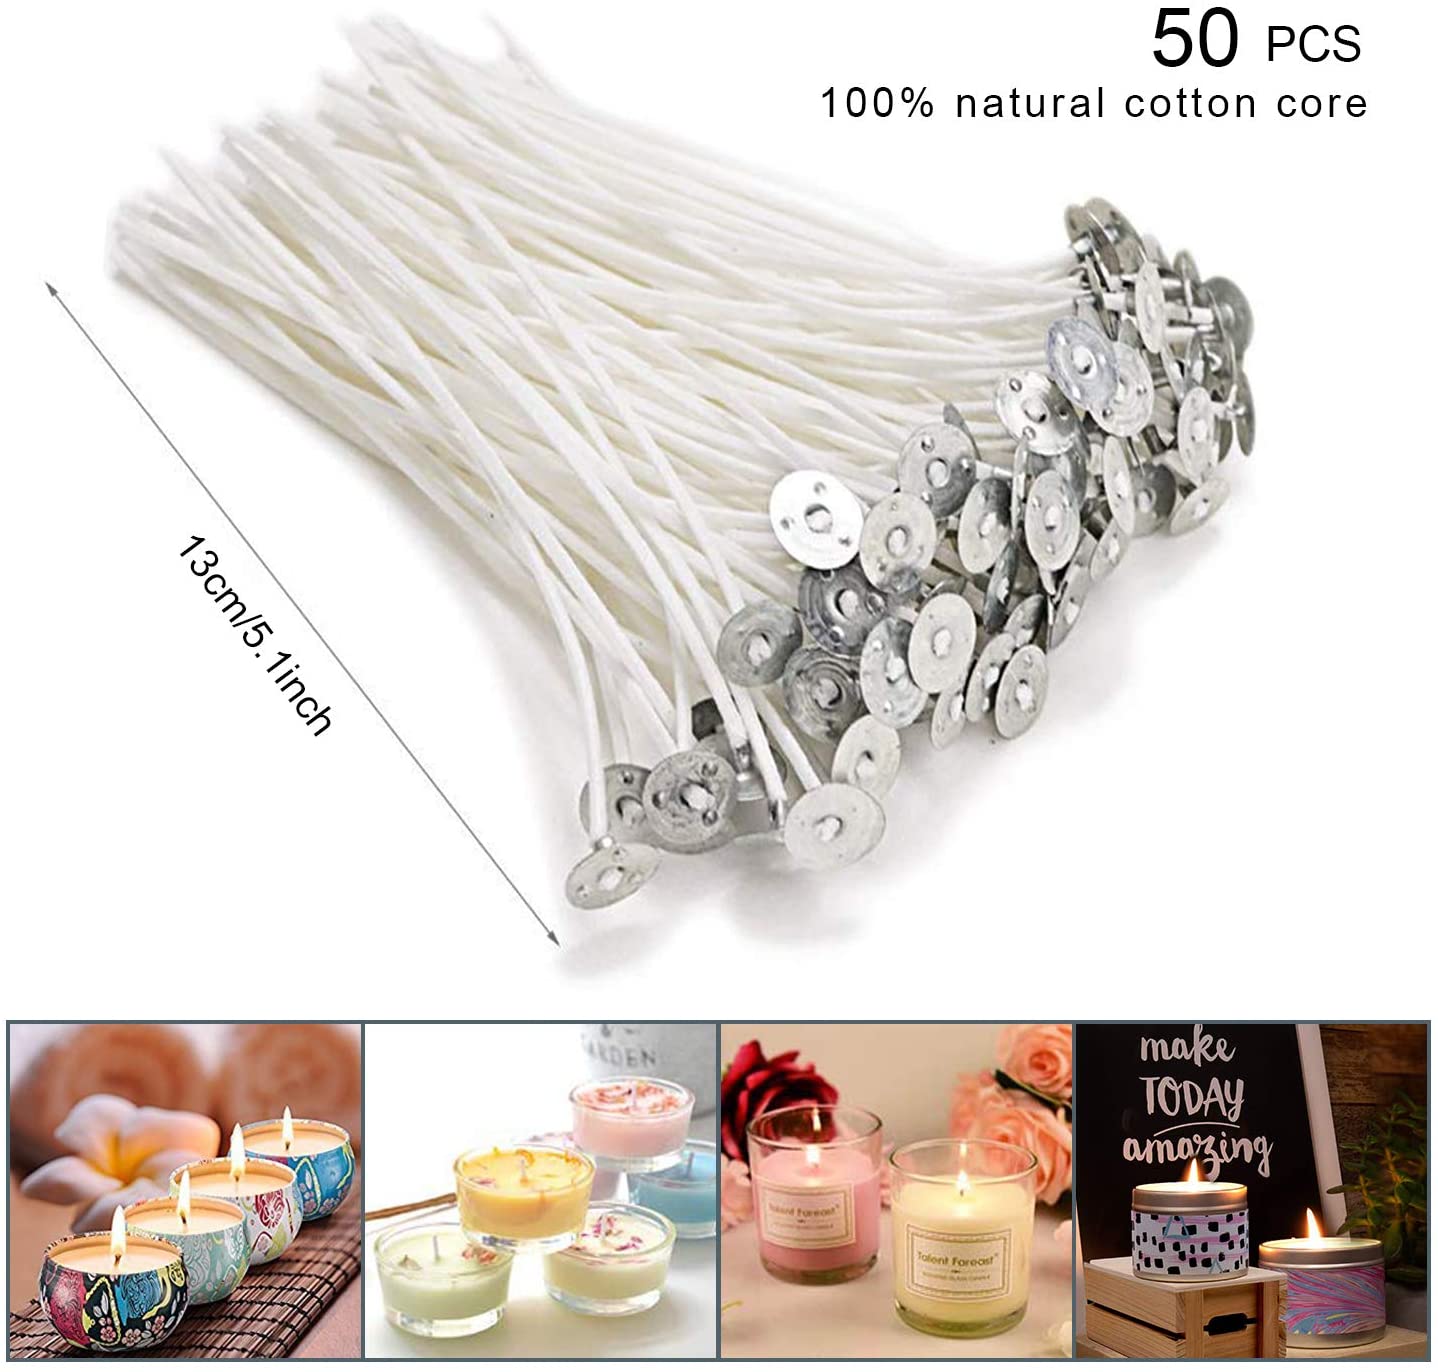 Candle Making Kit Supplies, Soy Wax DIY Candle Craft Tools Including Candle Make Pouring Pot, Candle Wicks, Wicks Sticker, 3-Hole Candle Wicks Holder